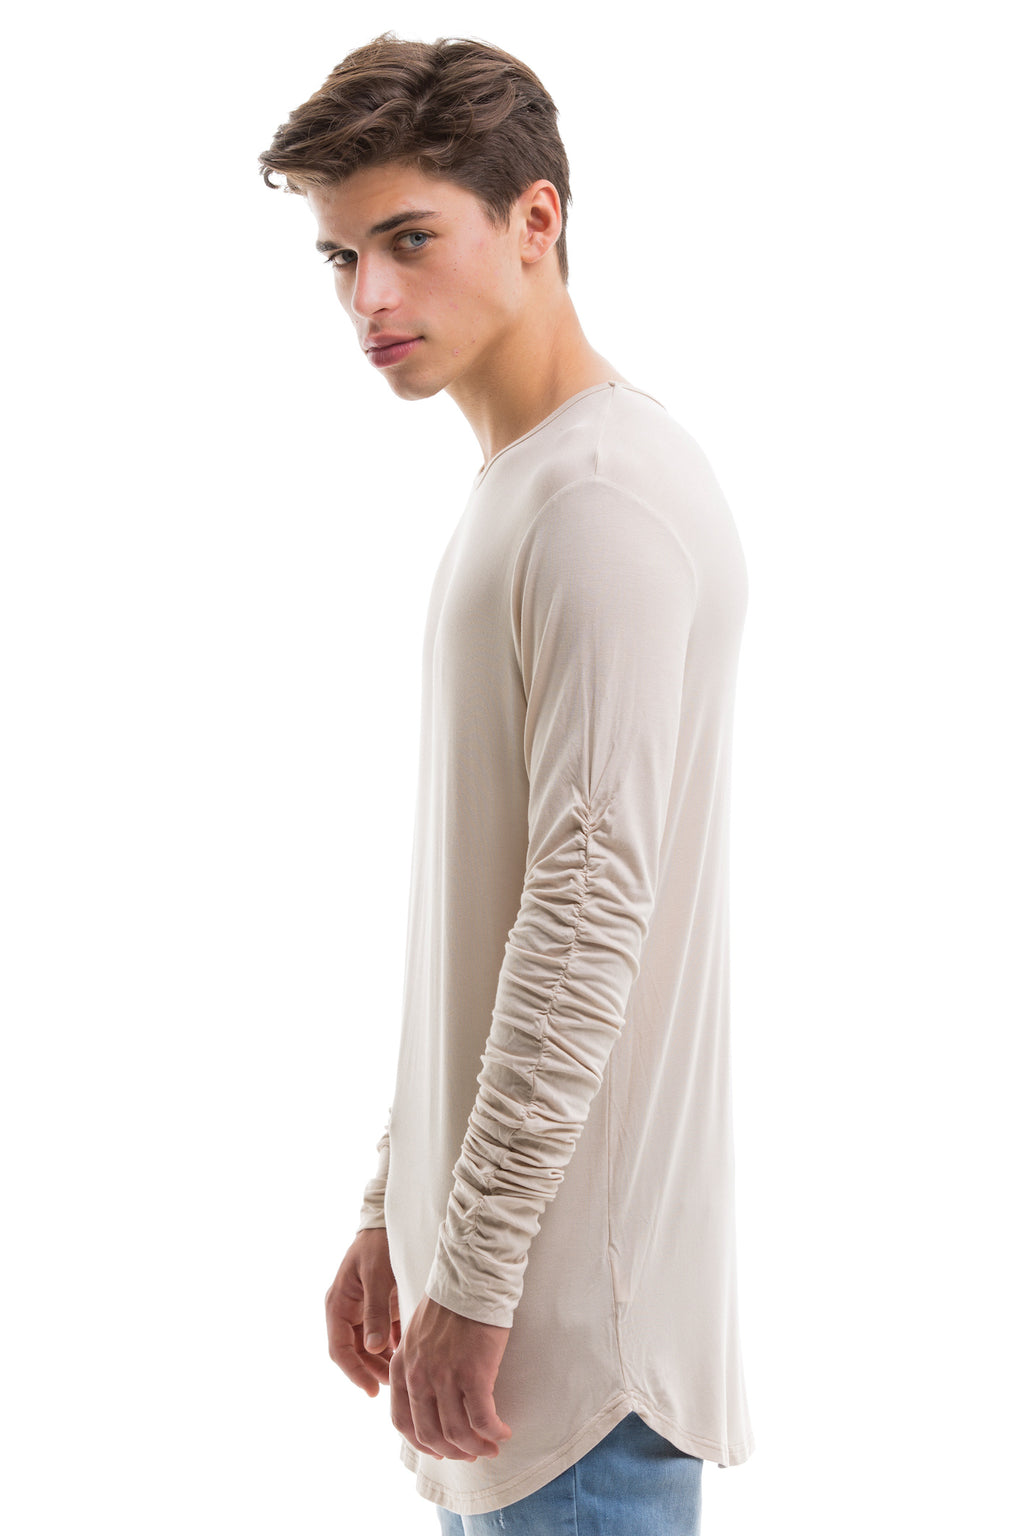 Beige Scoop Cut Long Sleeve T Shirt With Double Cuffed Sleeve Ends - Side View